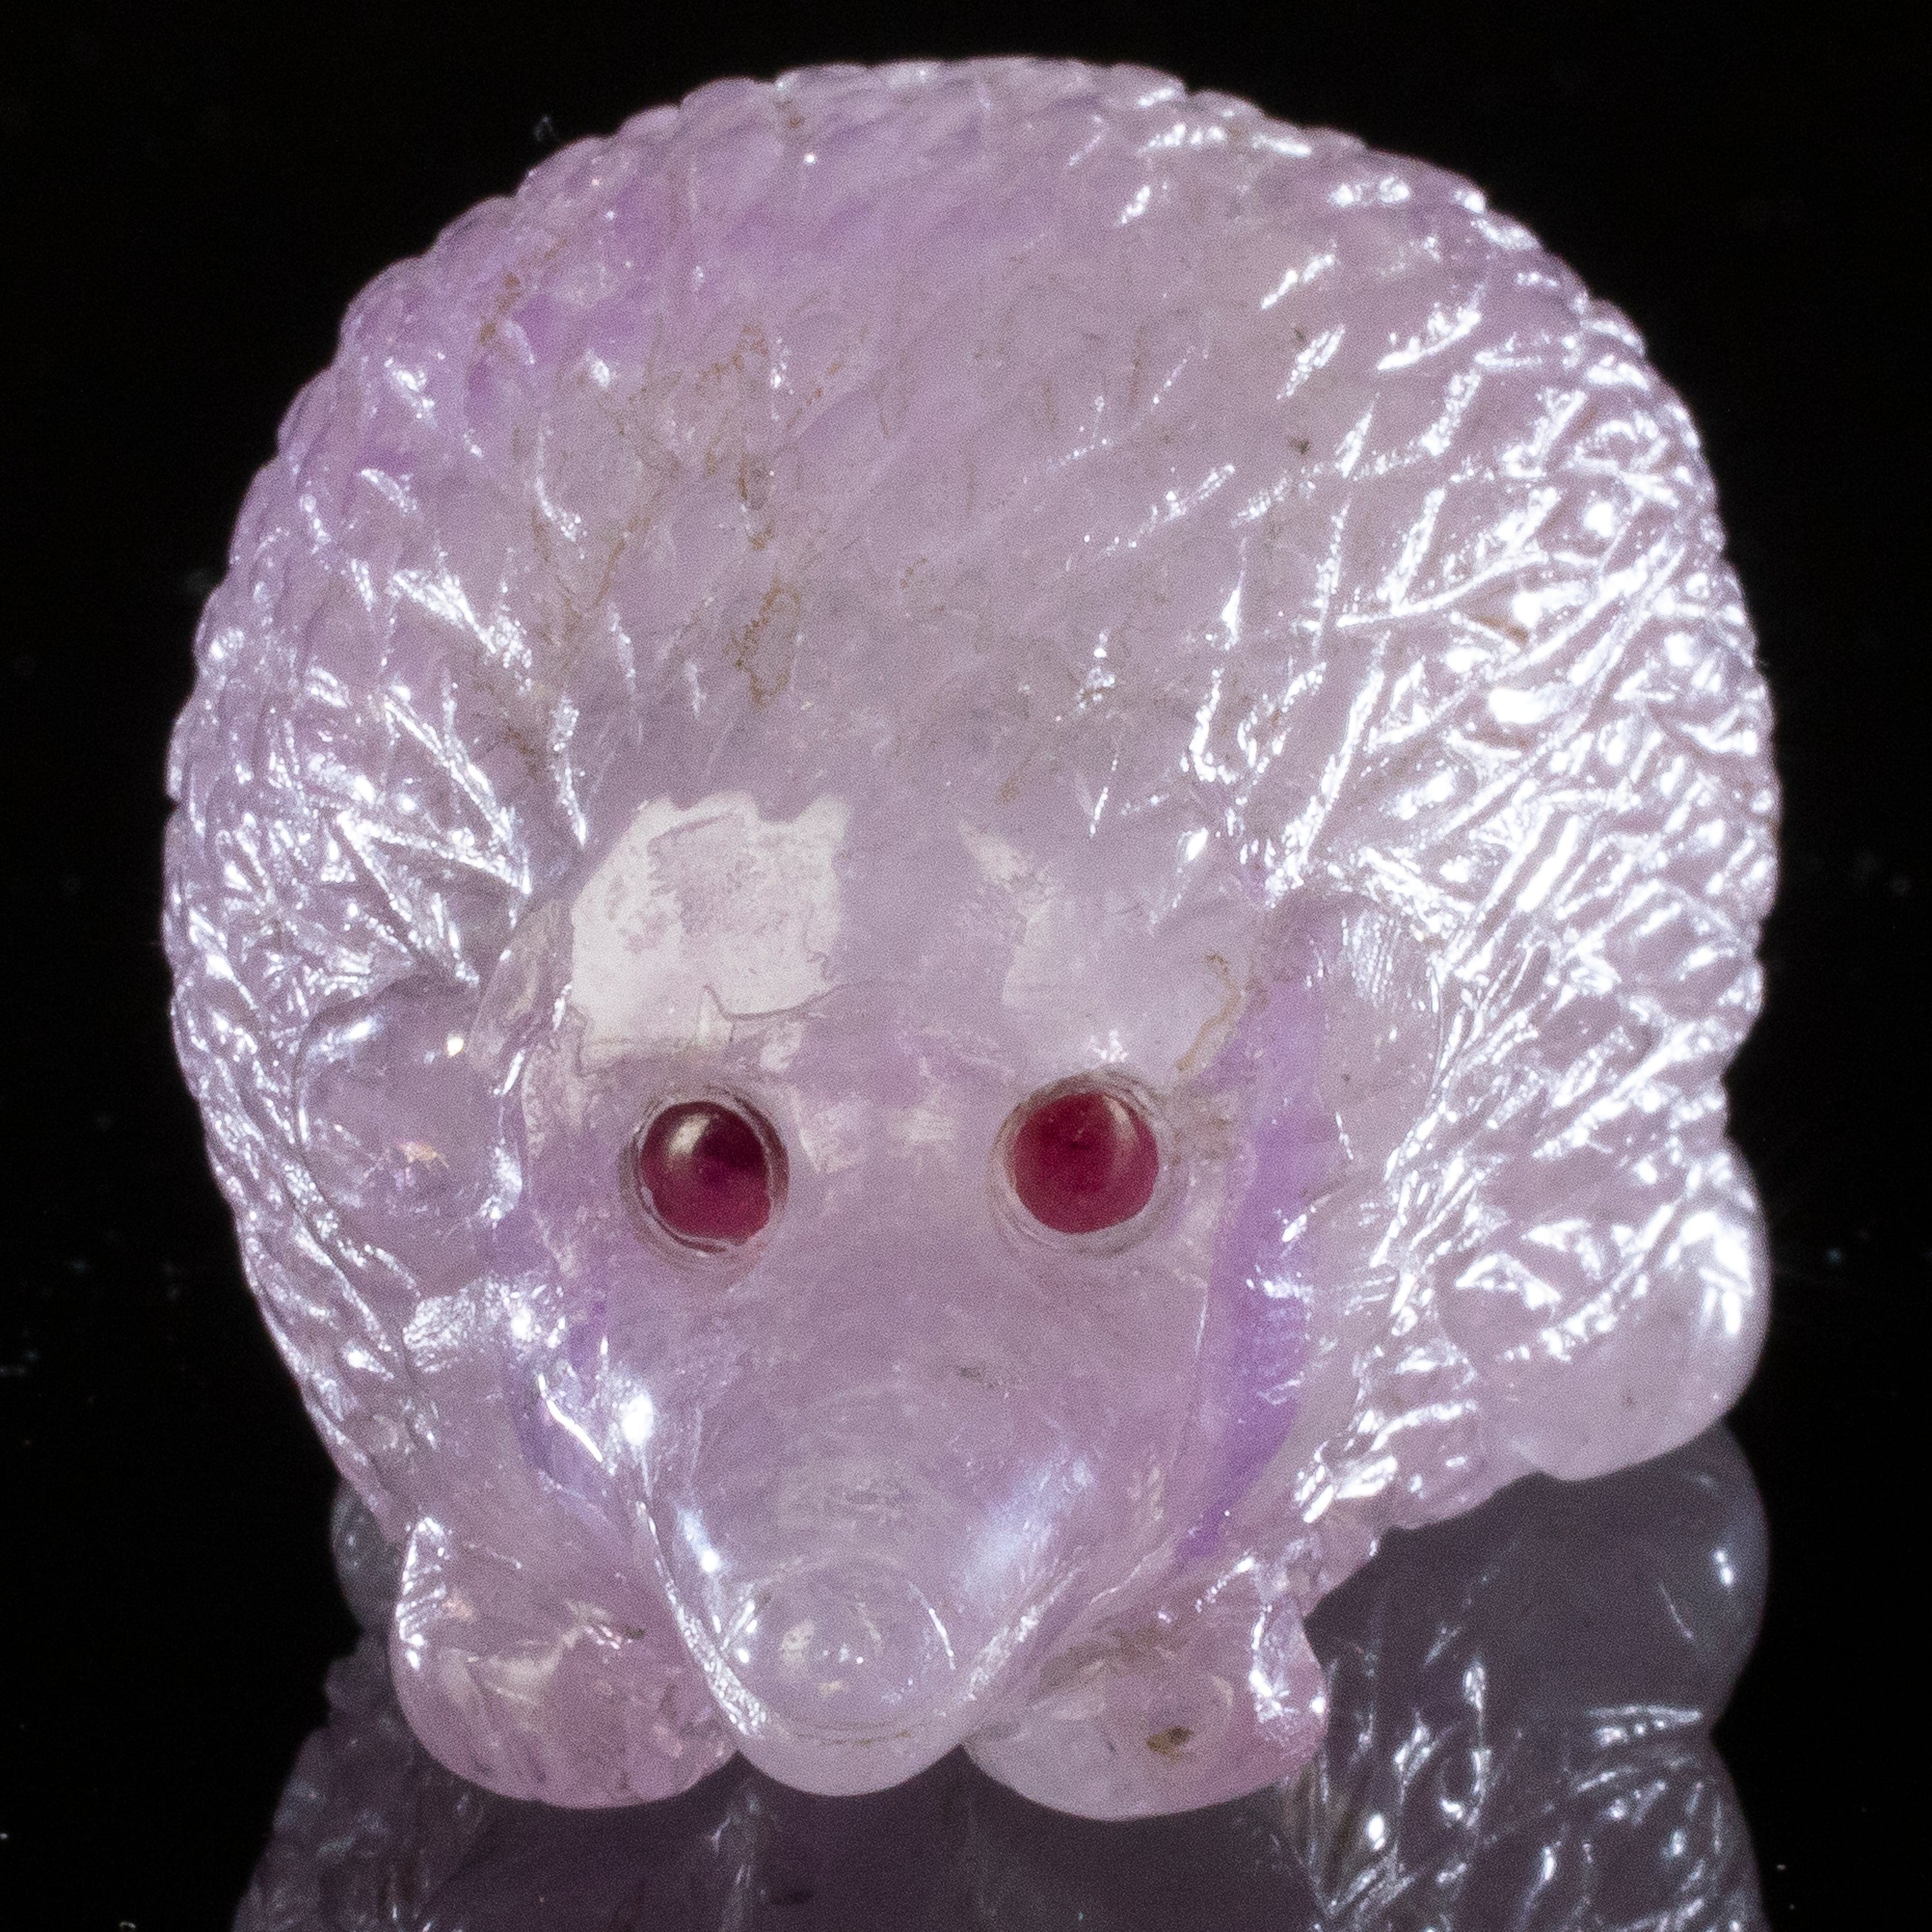 Kalifano Love Birds Carvings Amethyst Porcupine Carving LB.SmPor.001